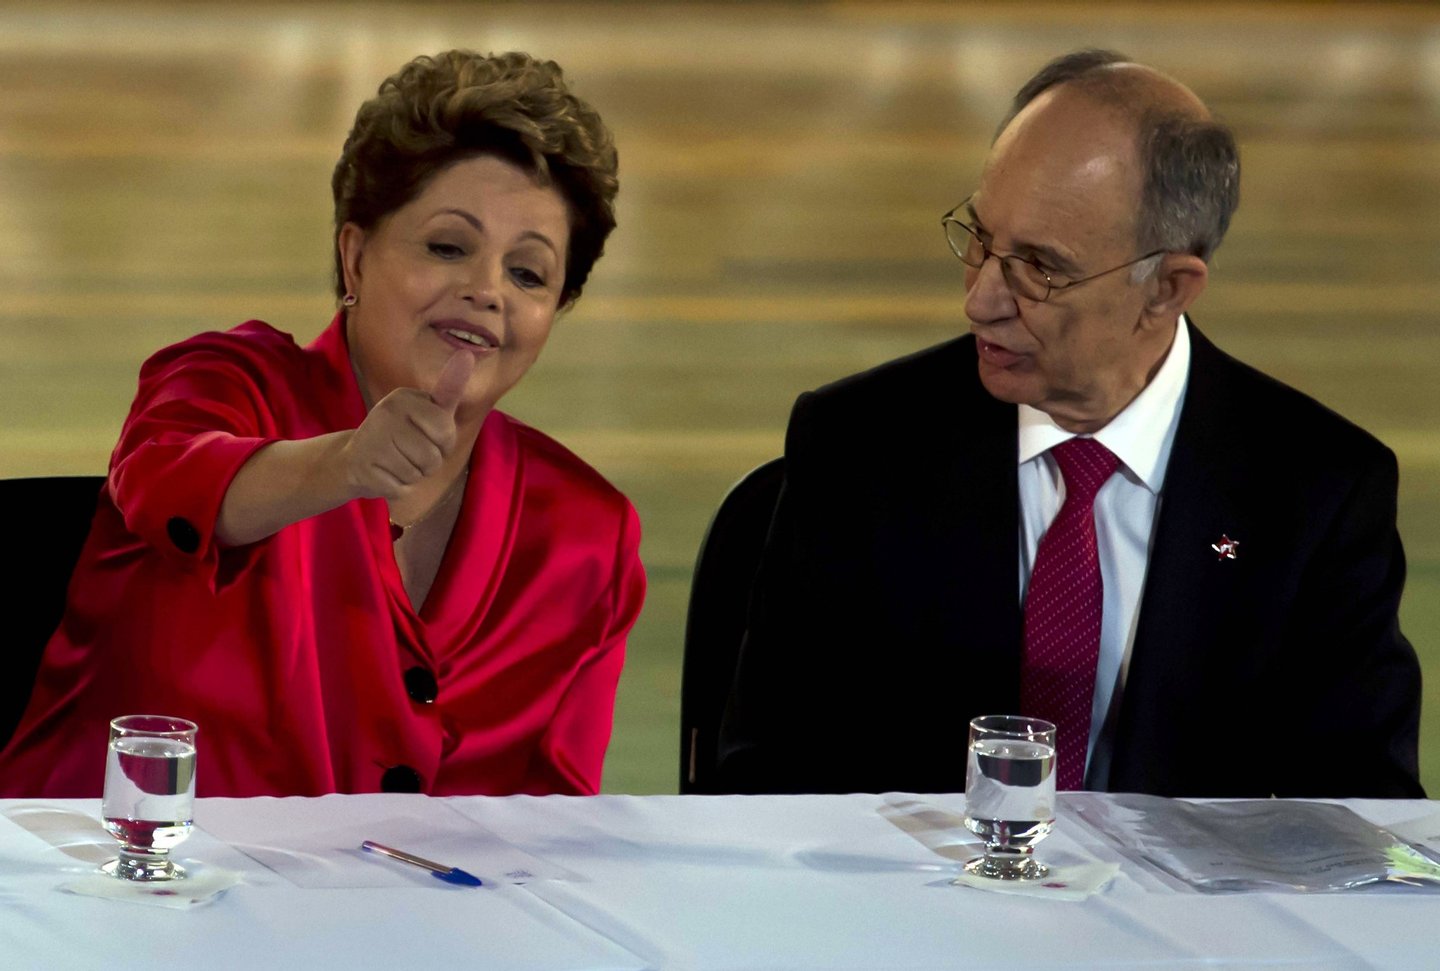 Brazilian President Dilma Rousseff (L) gestures next to Rui Falcao, president of the Workers Party (PT), during celebrations to mark the 34th anniversary of the founding of the Workers Party (PT) in Sao Paulo, Brazil on February 10, 2014. AFP PHOTO / NELSON ALMEIDA (Photo credit should read NELSON ALMEIDA/AFP/Getty Images)